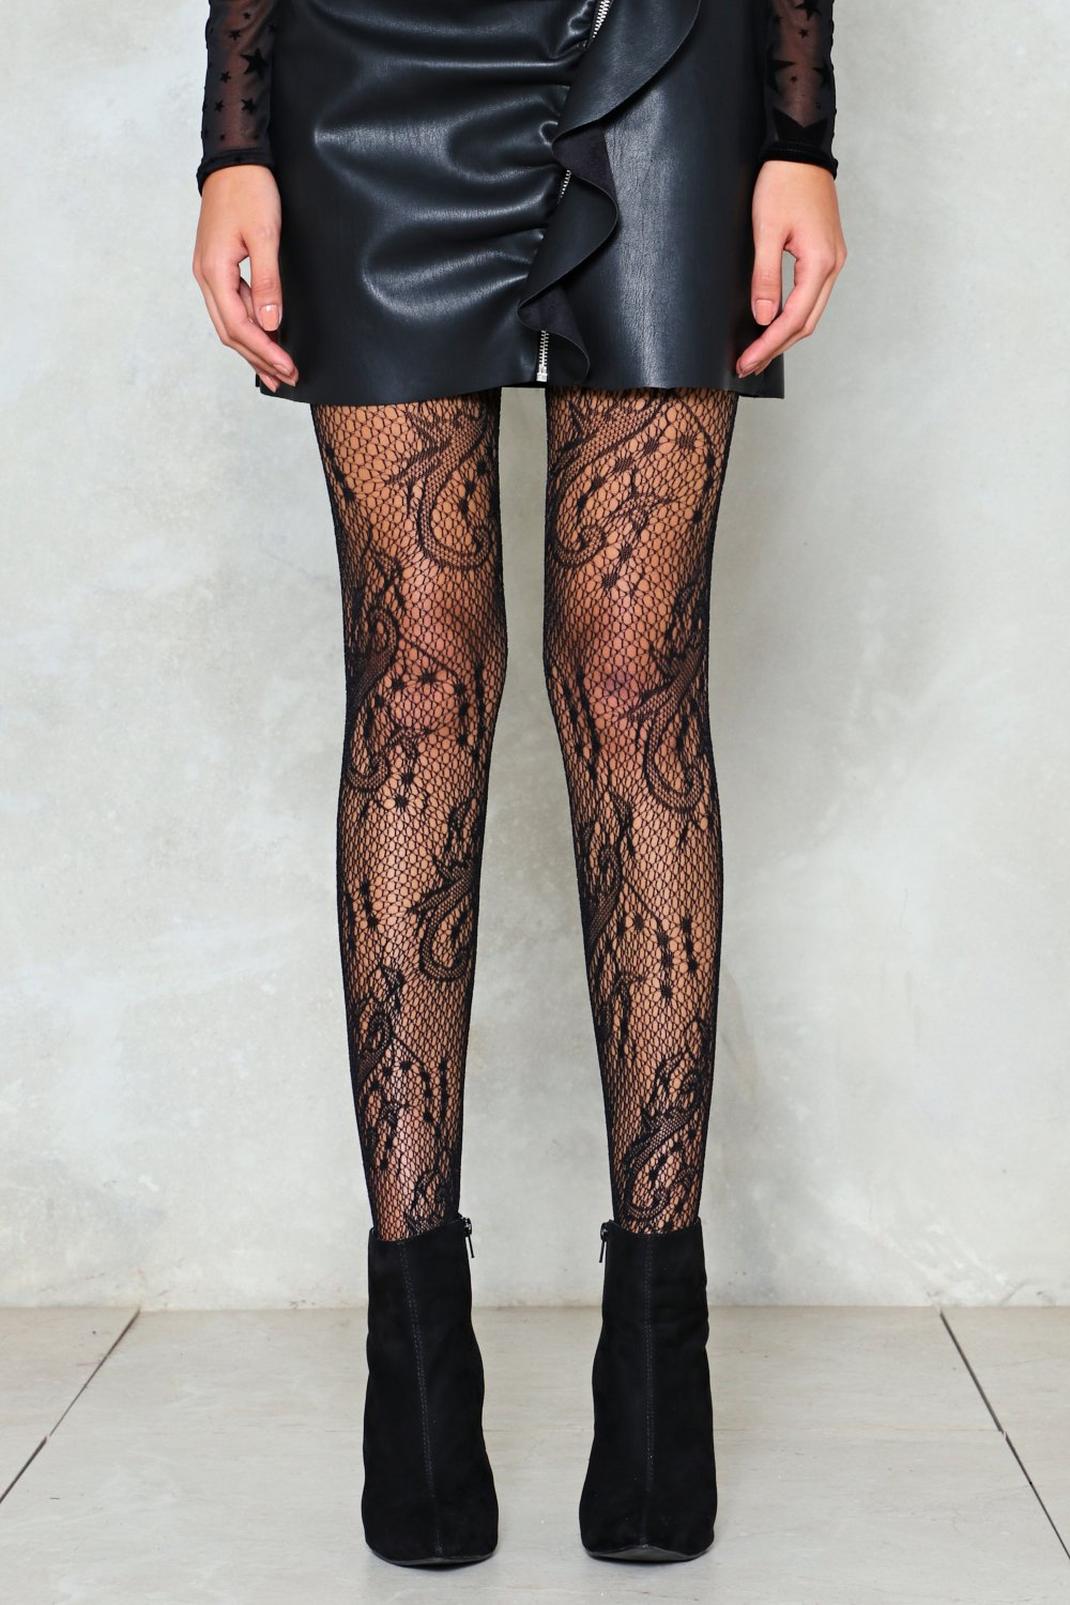 Net For You Fishnet Tights